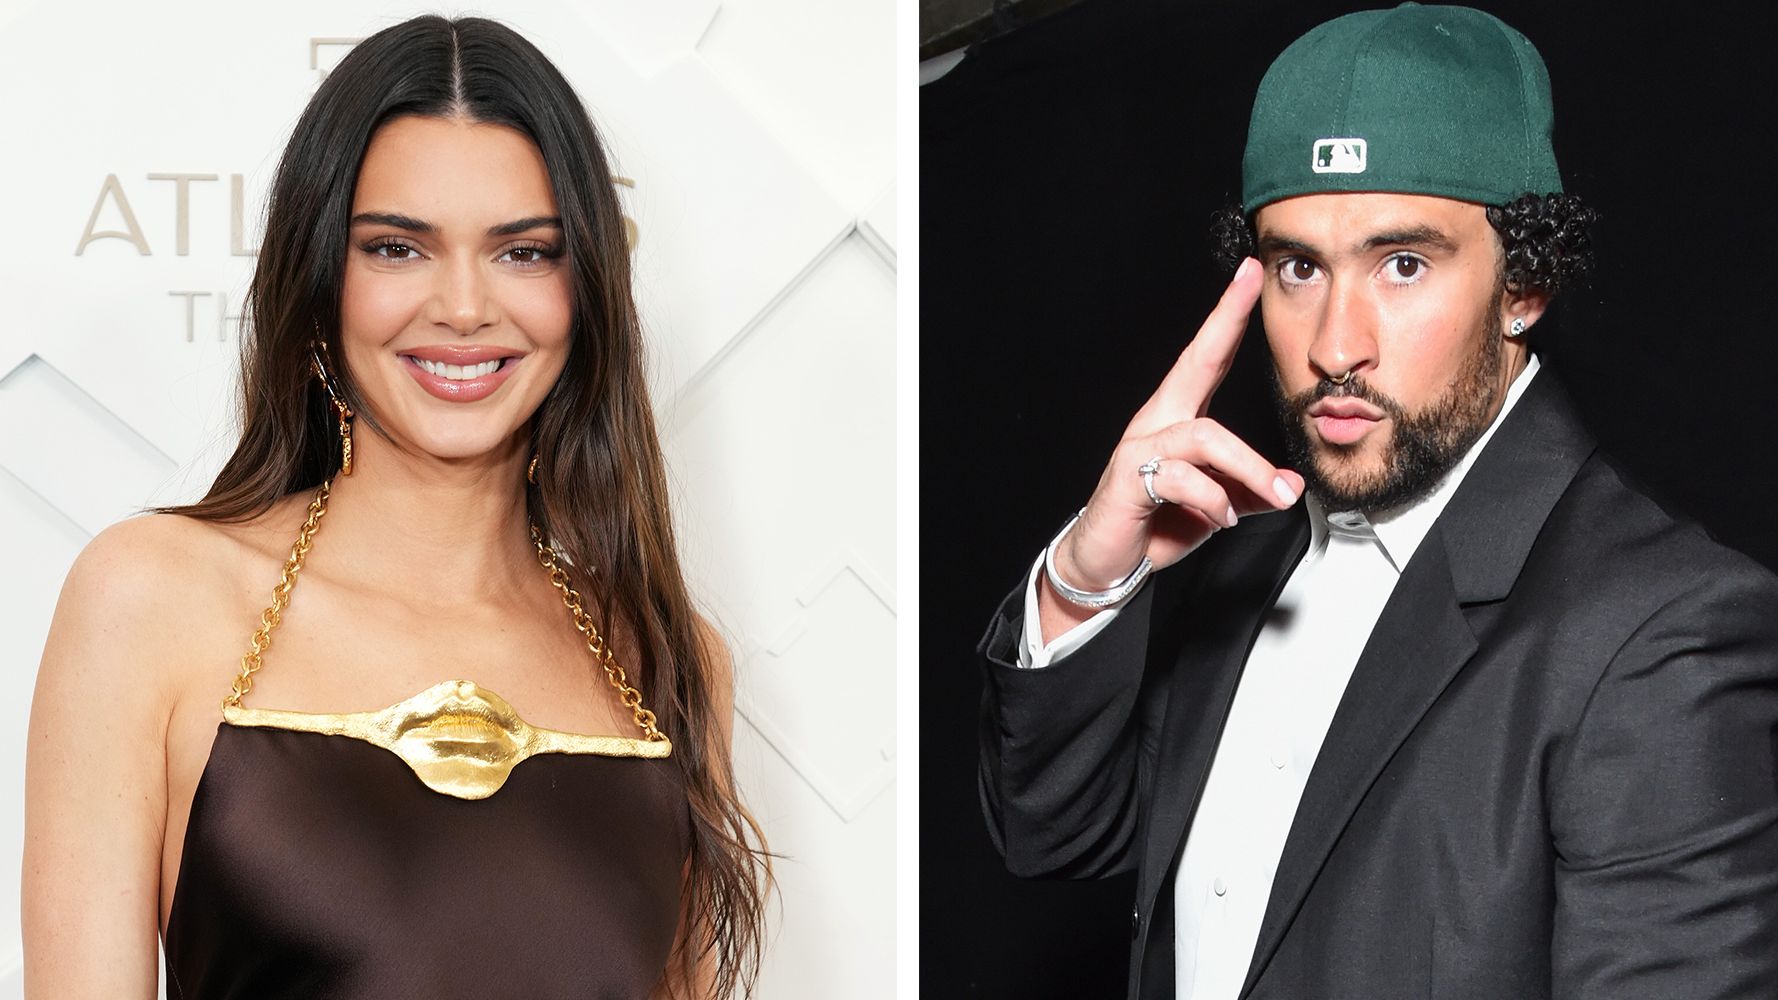 Kendall Jenner and Bad Bunny's Full Relationship Timeline